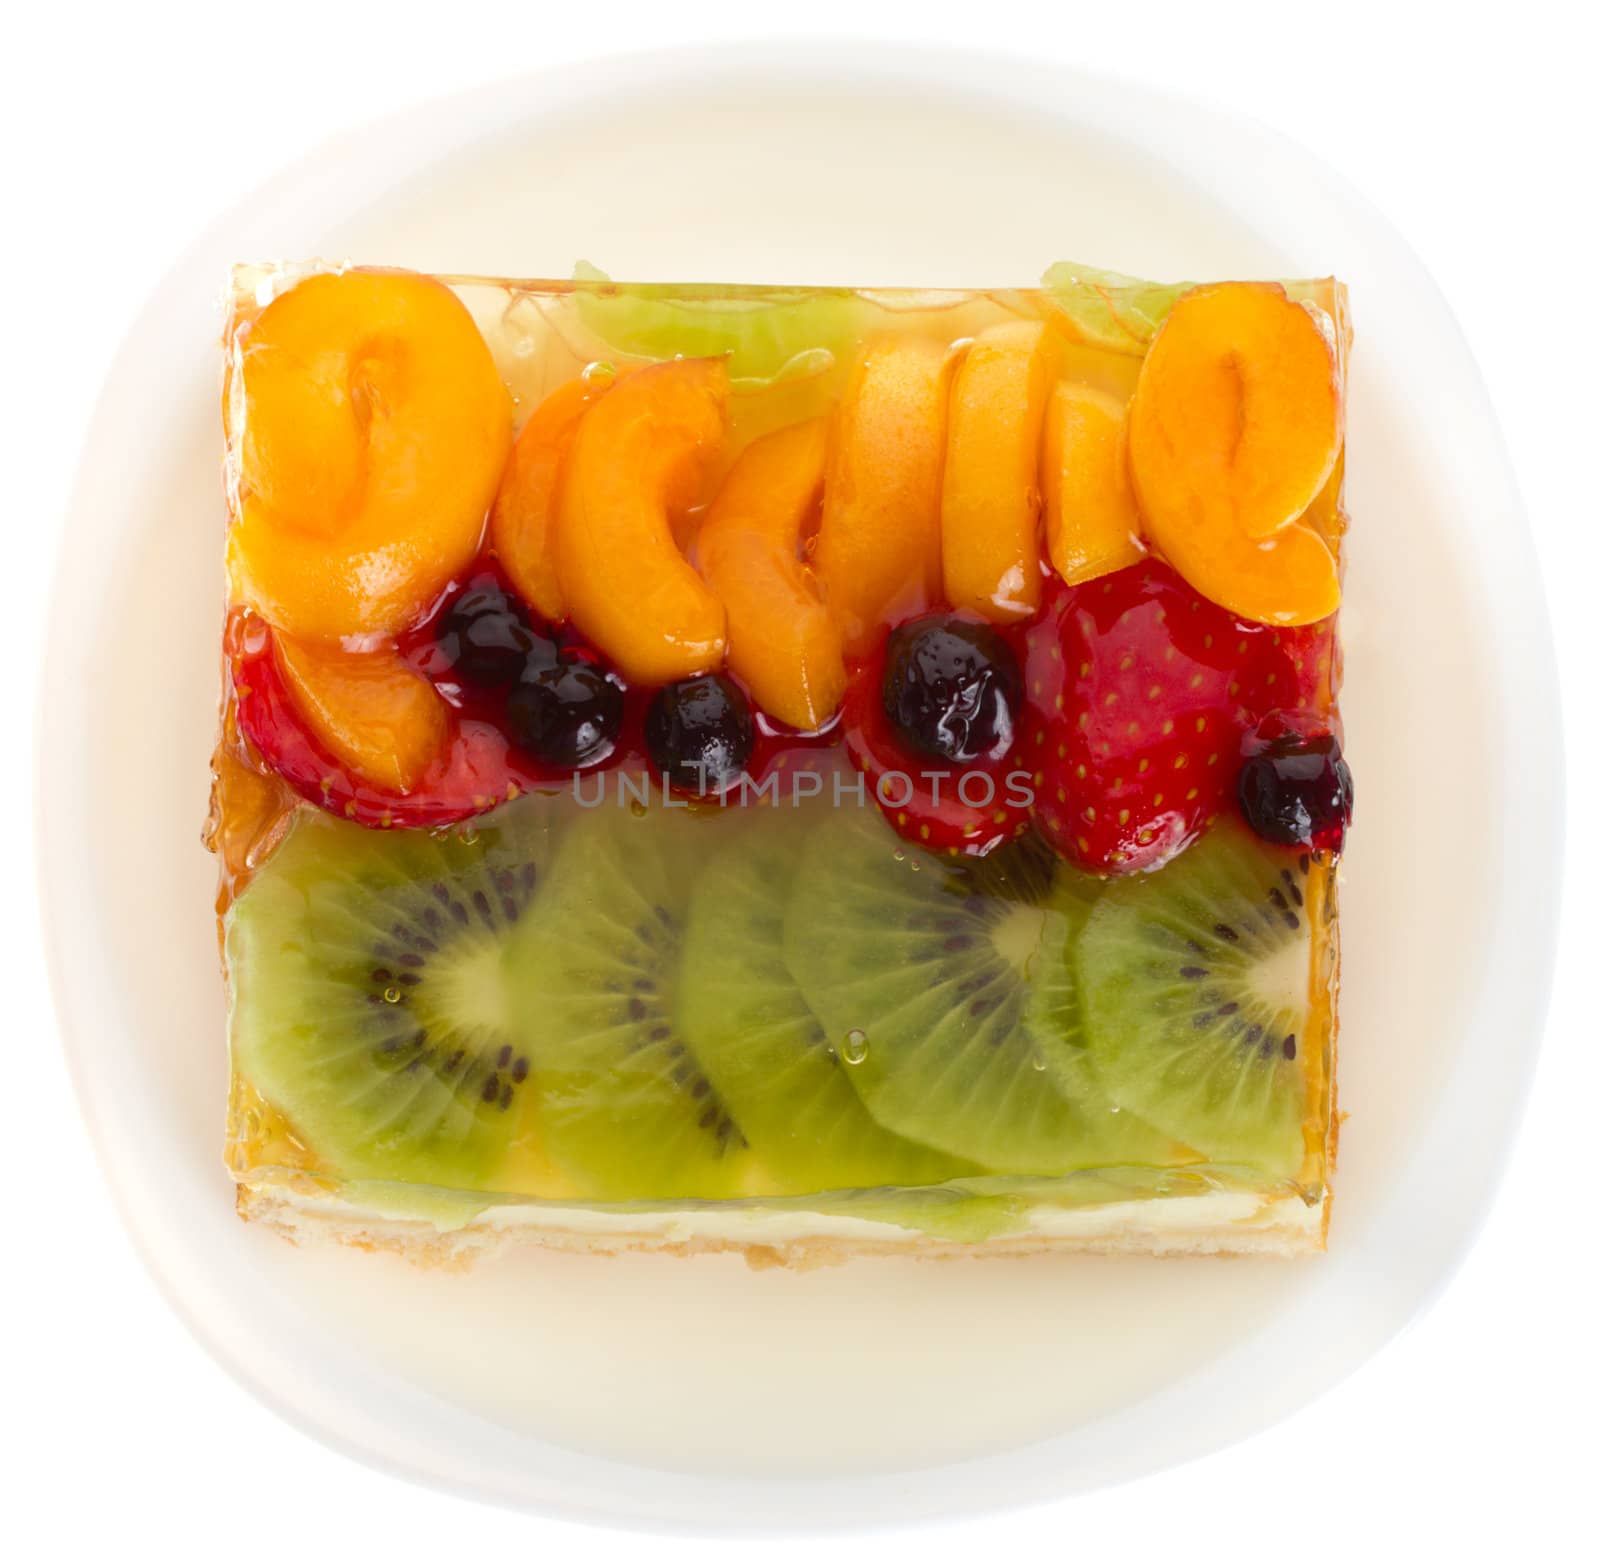 close-up curd cake with jellied fruits and berries, isolated on white